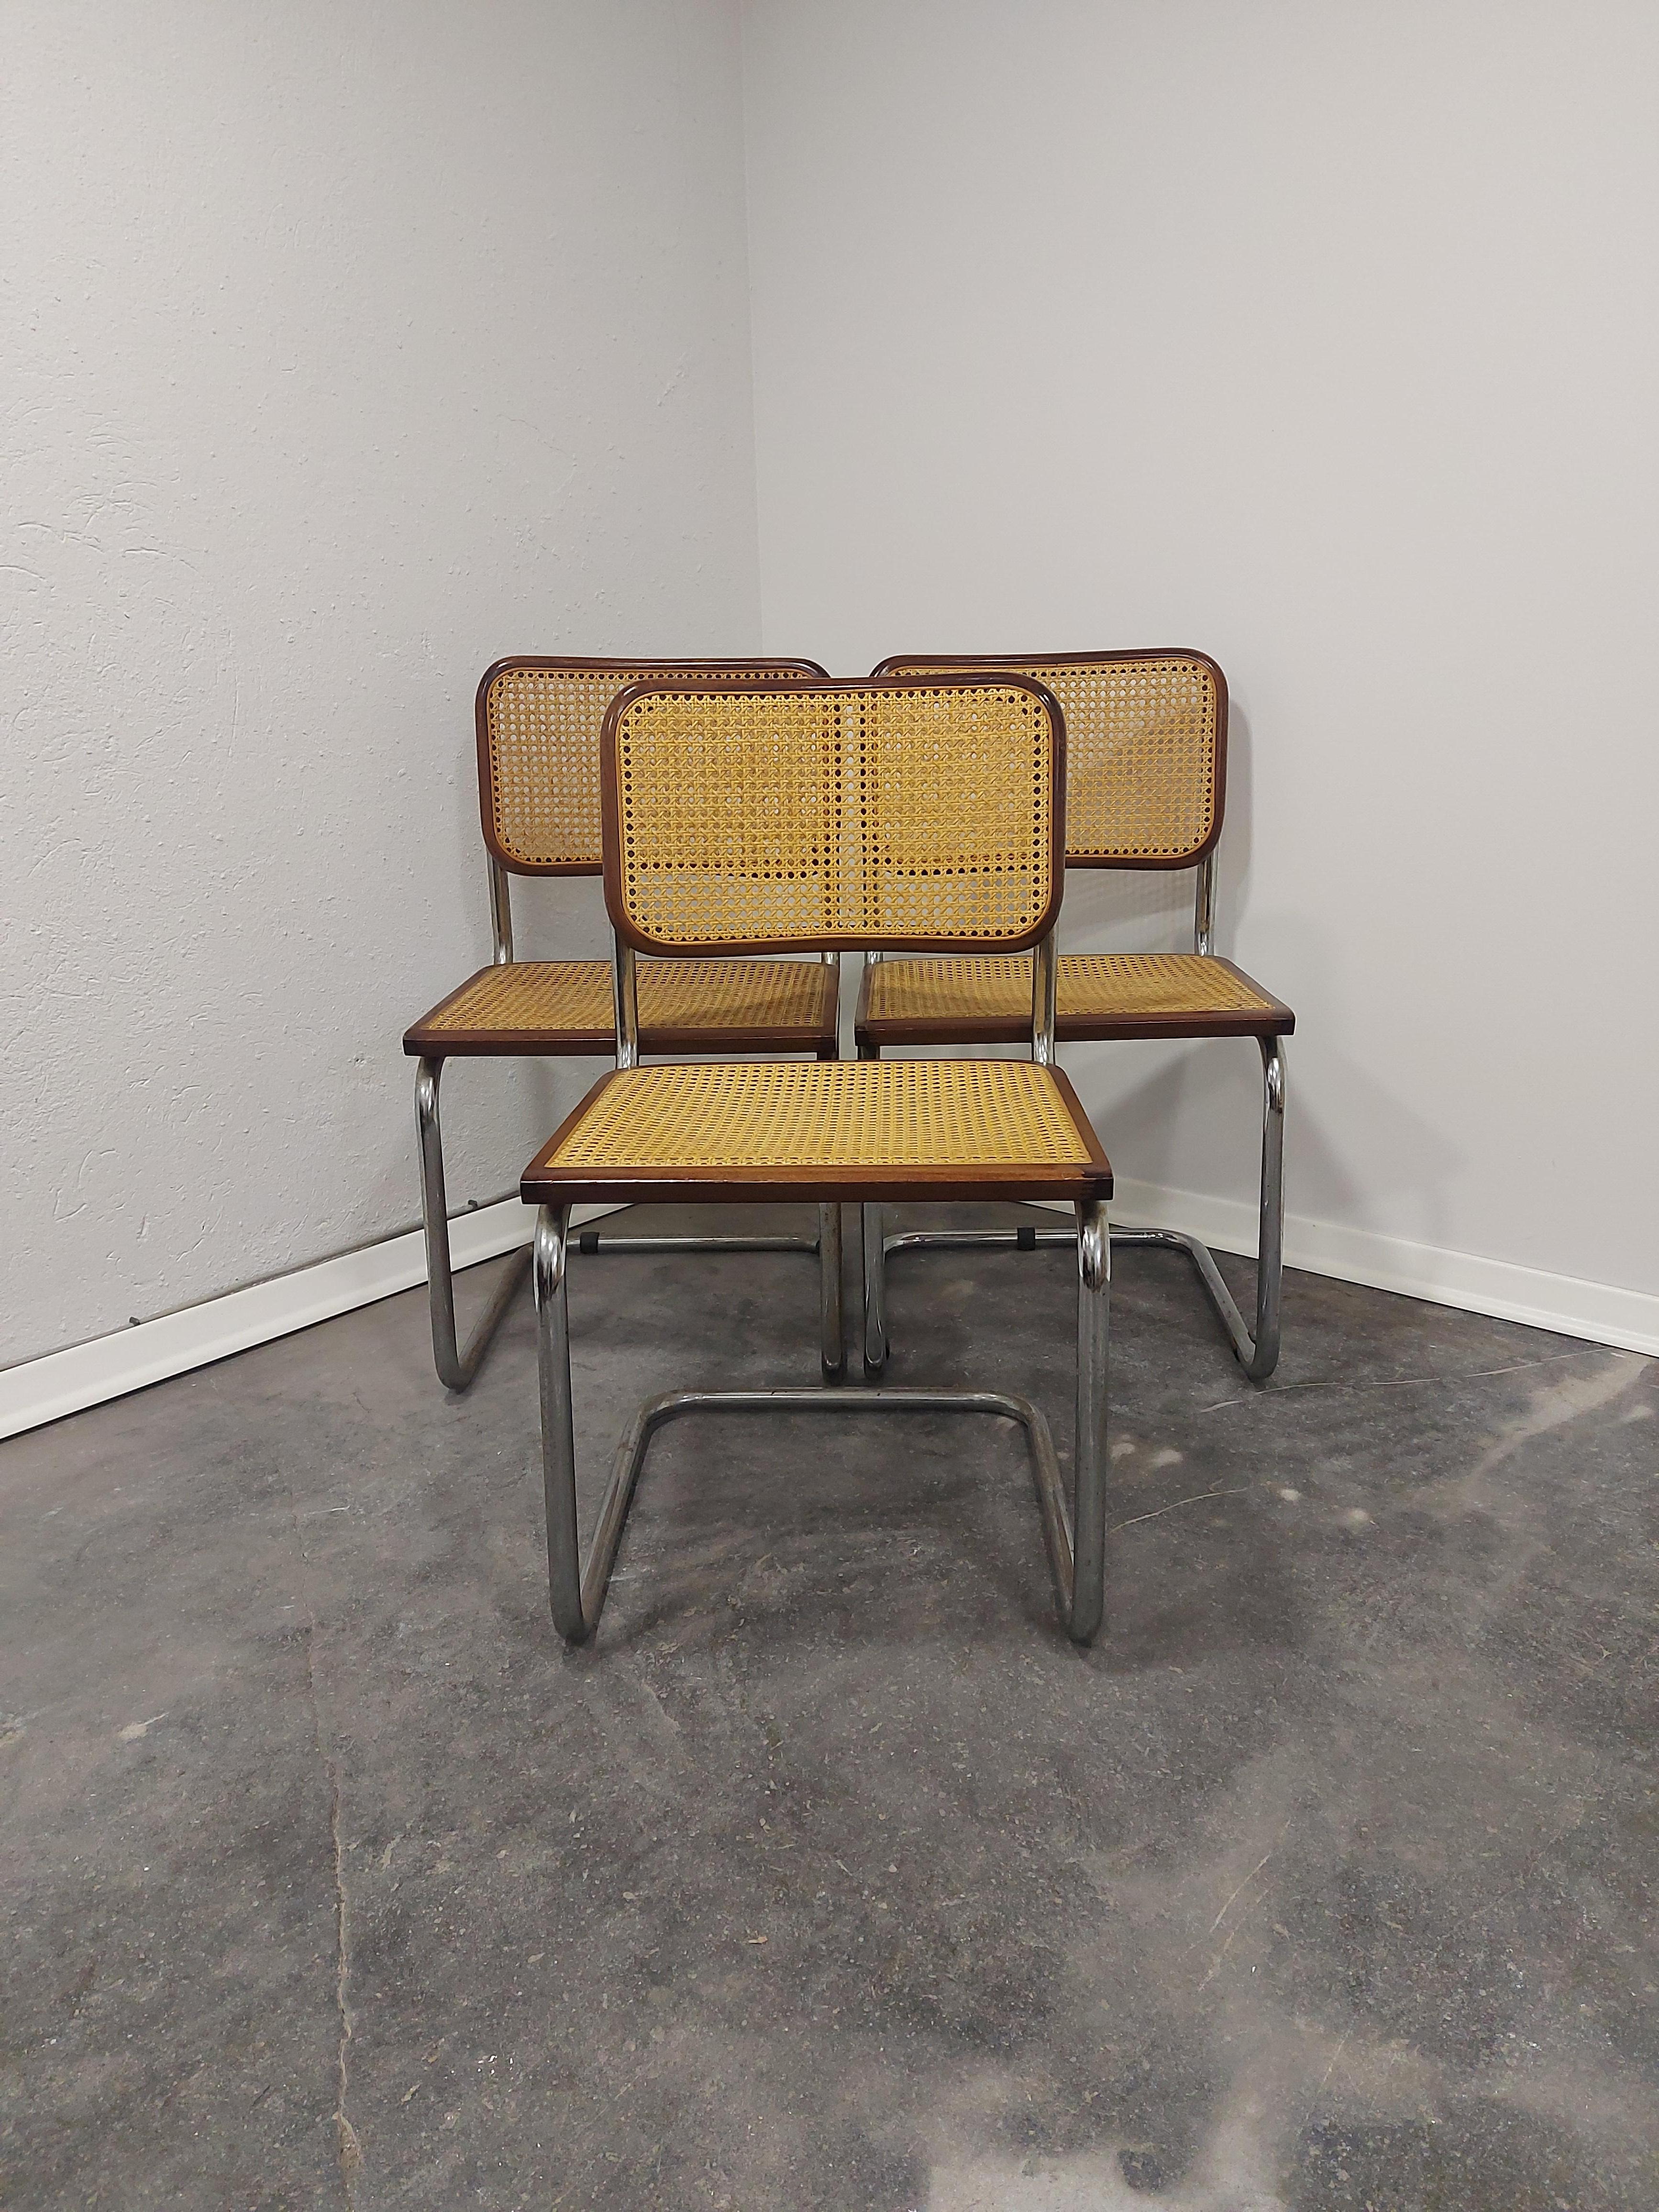 Cesca chair, 1970s
Designer Marcel Breuer
Design Period: 1920 to 1949
Production Period: 1970 to 1979
Style: Midcentury
Detailed Condition: This vintage item is in its original state. It has no defects and no restorations. Visible signs of use